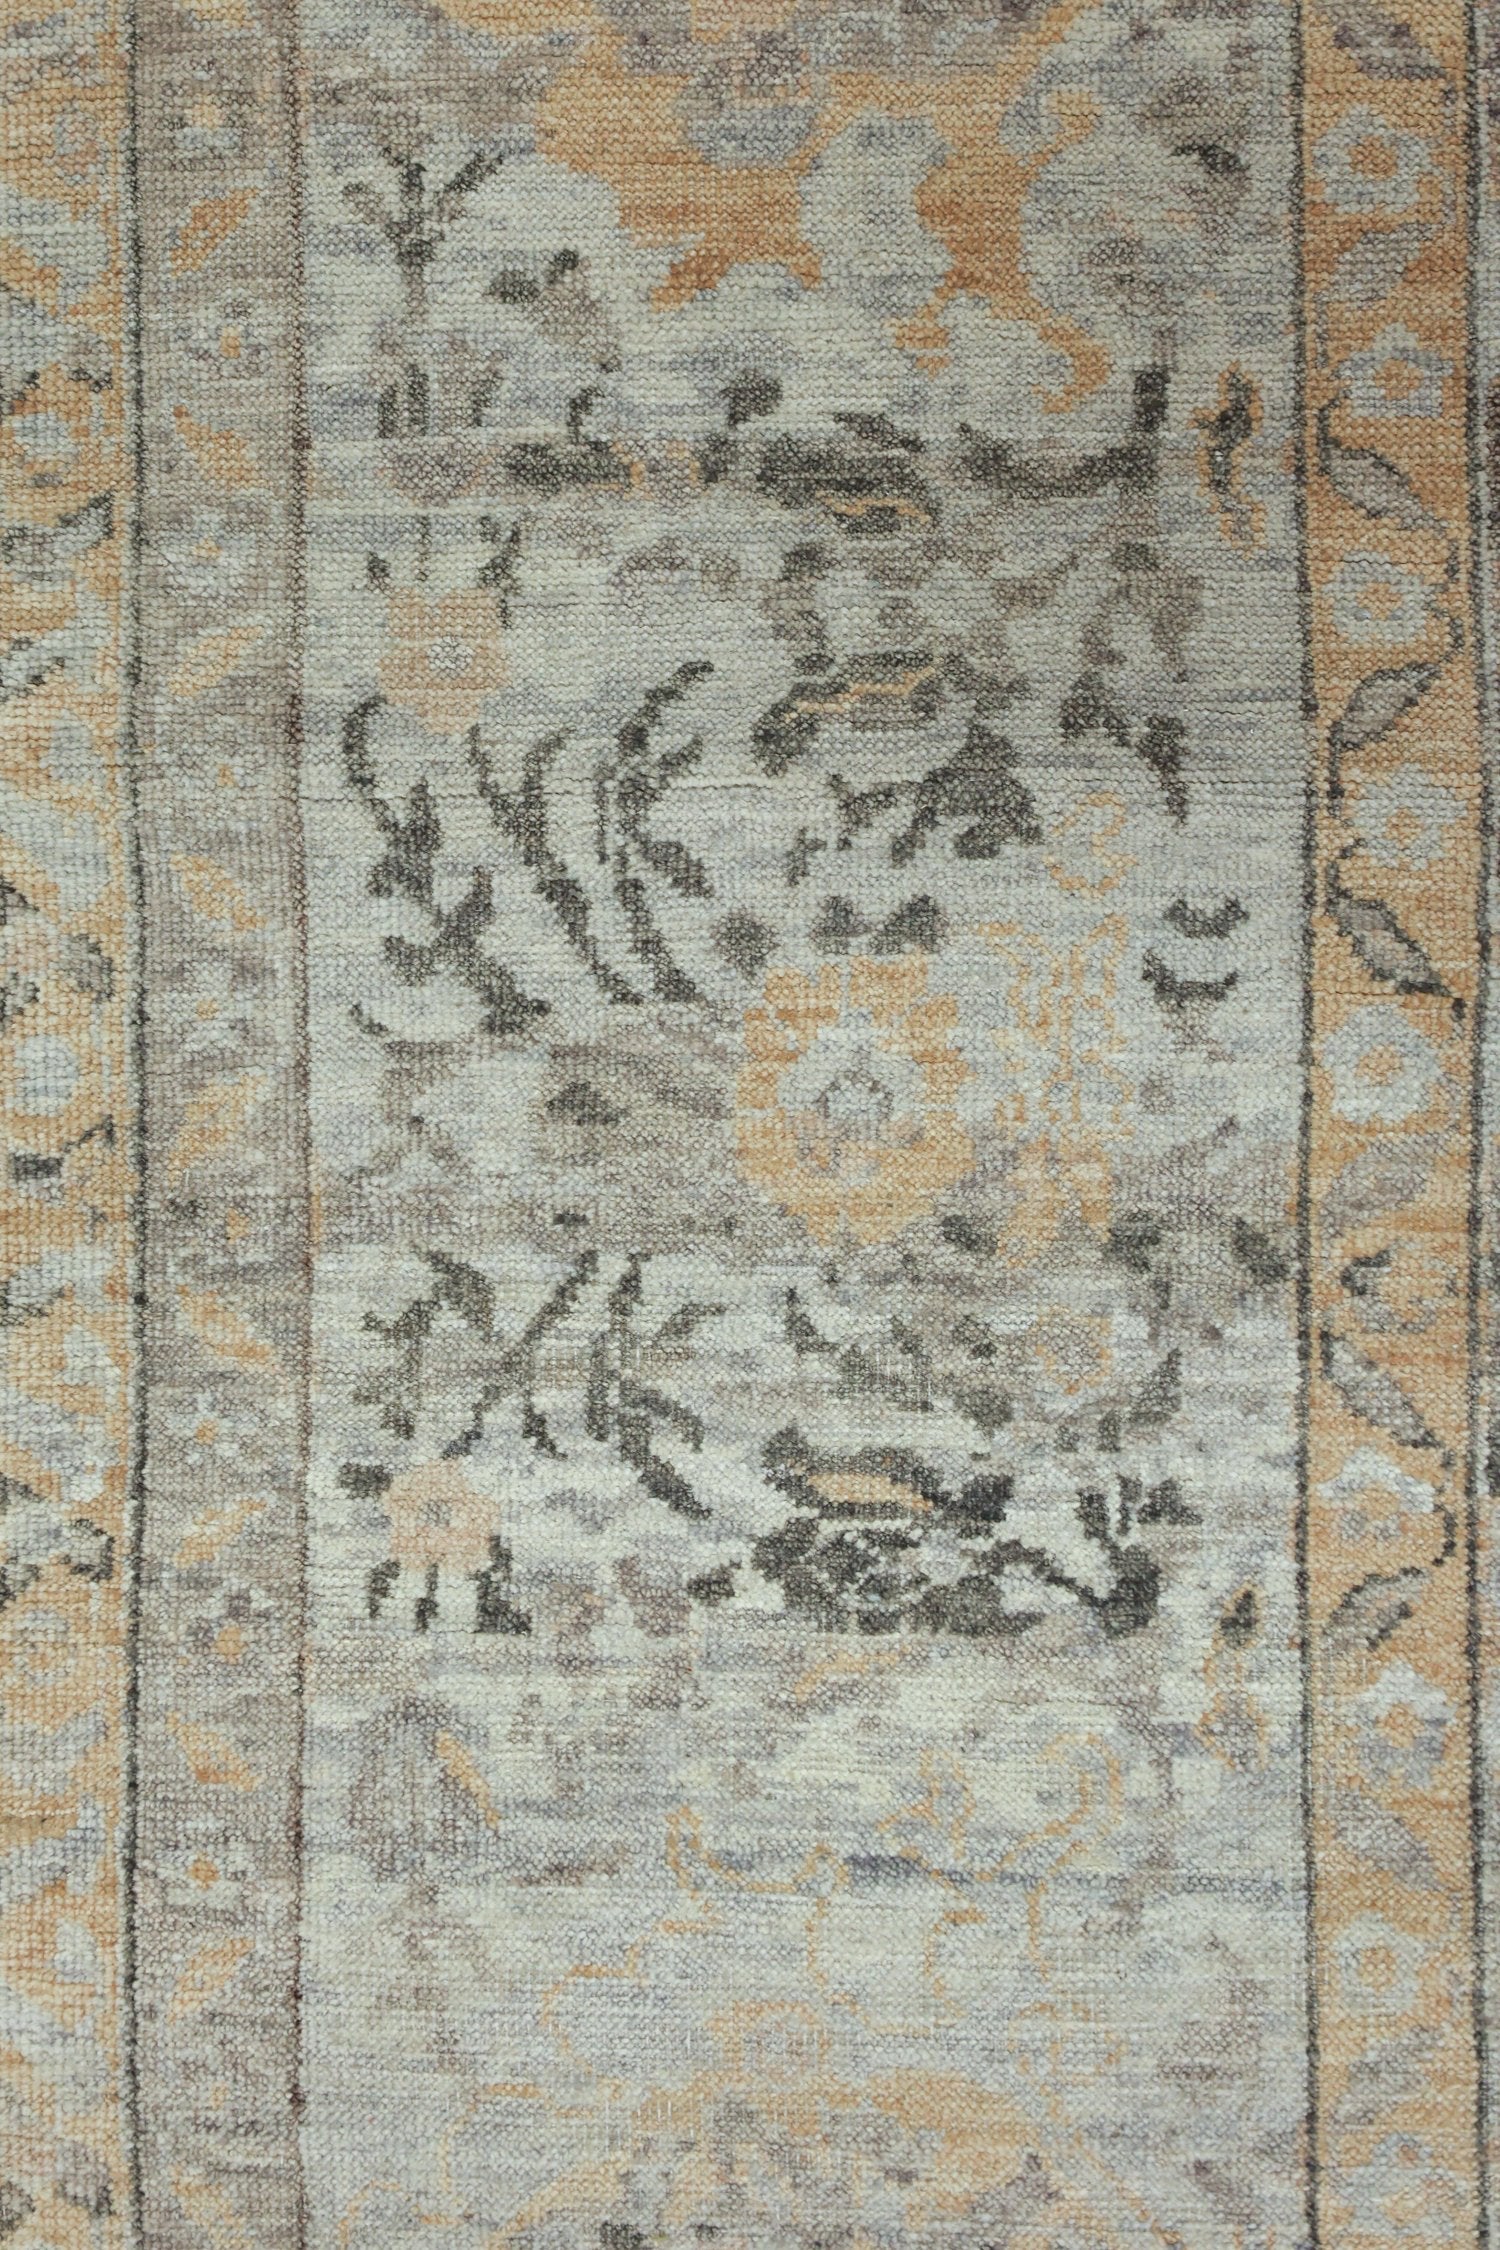 Sultanabad Handwoven Transitional Rug, J72000